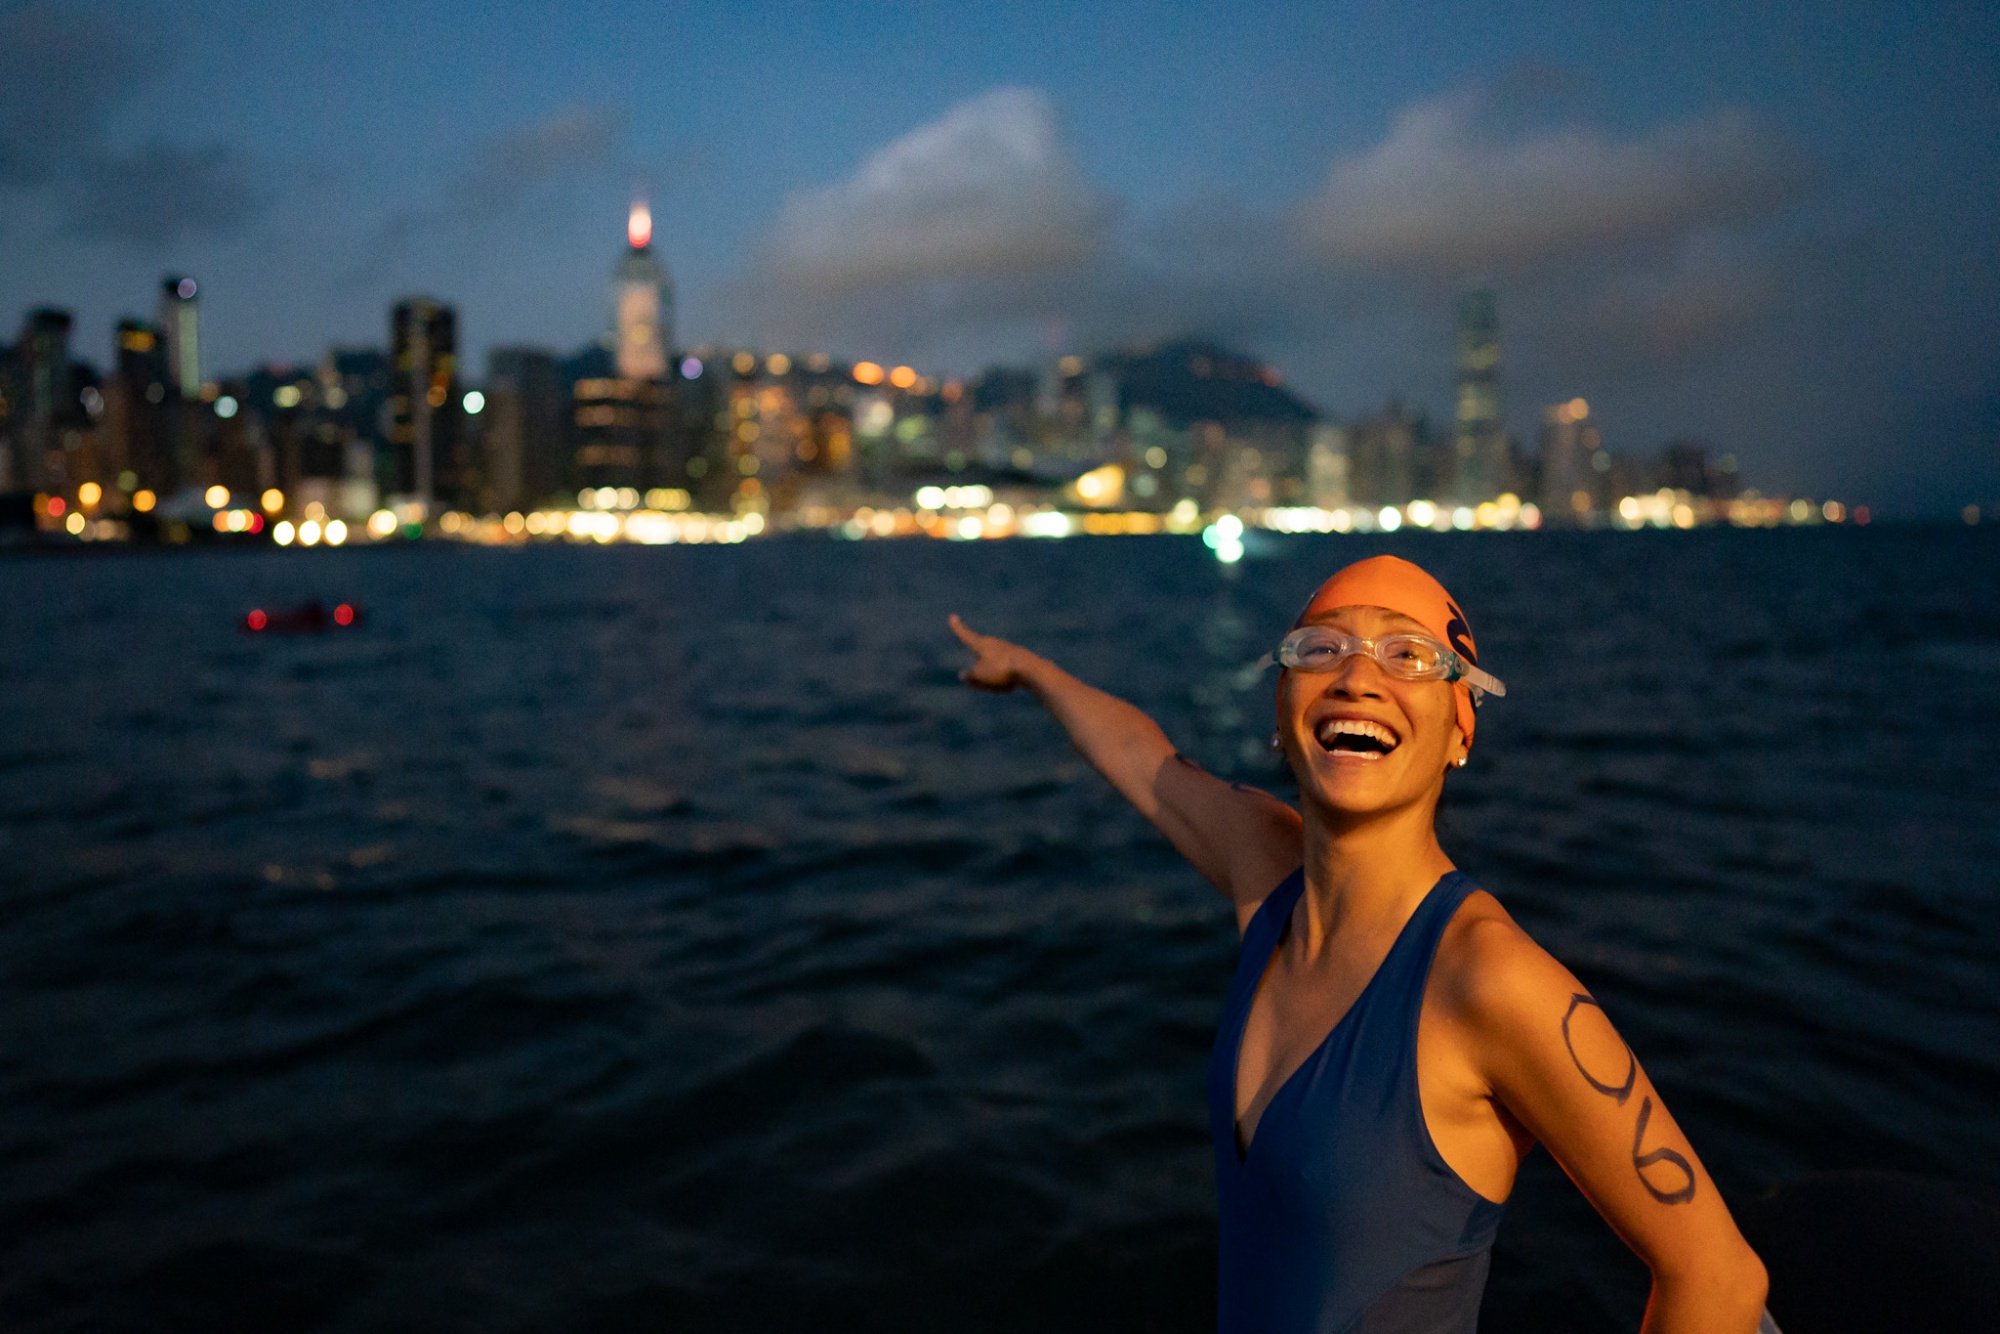 dailynewsofopenwaterswimming.com: Making A Splash, Making Waves For Others In Hong Kong